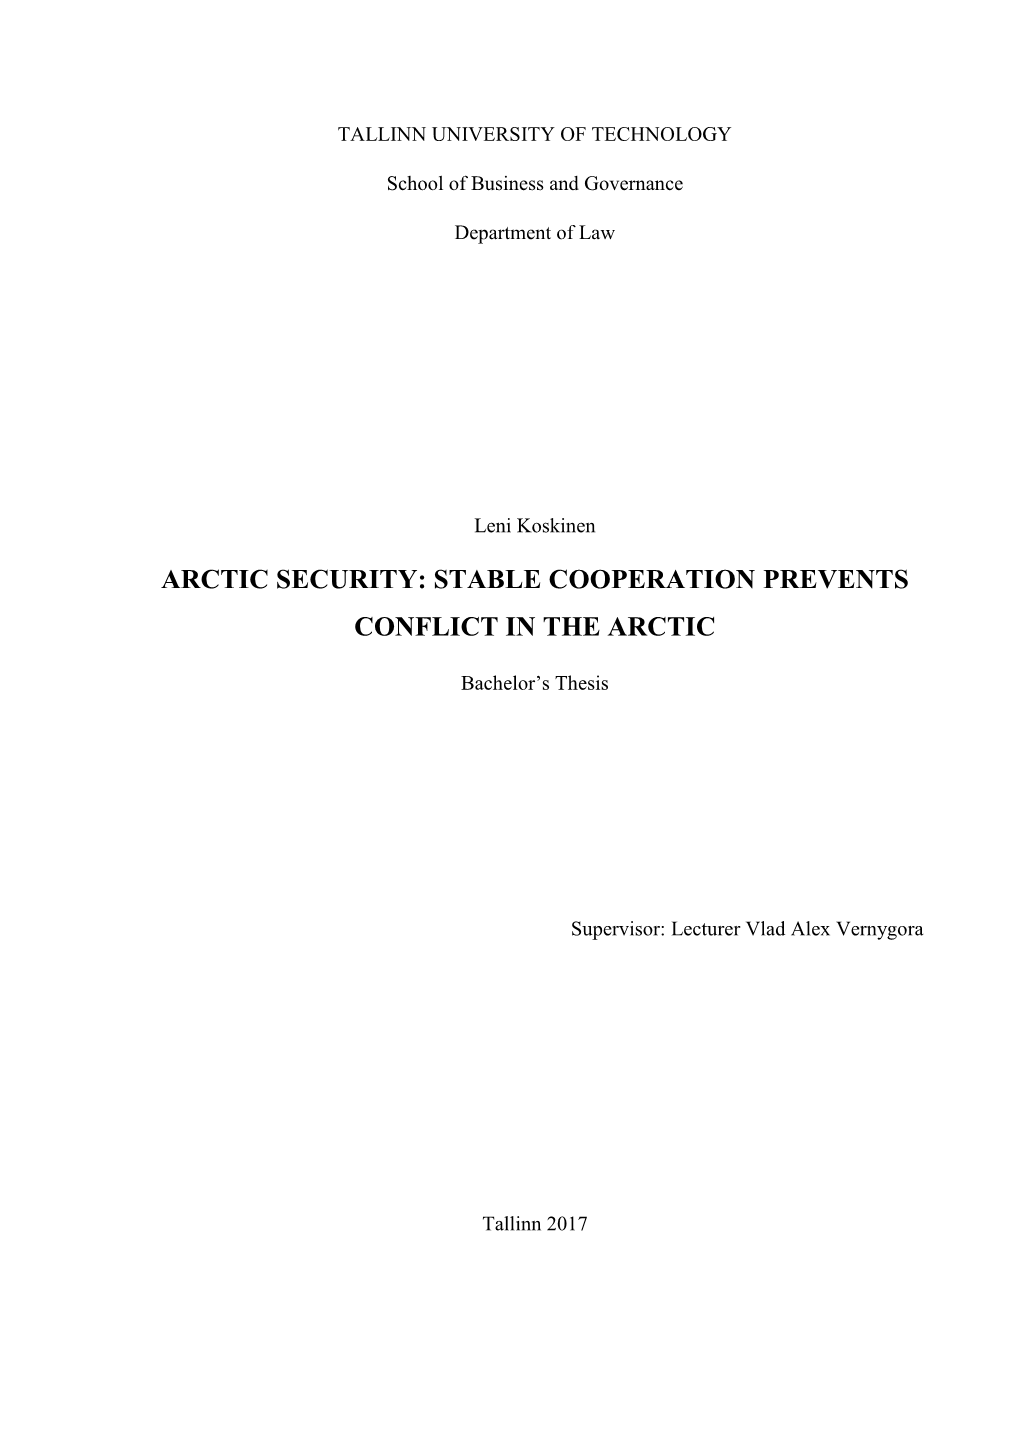 Arctic Security: Stable Cooperation Prevents Conflict in the Arctic